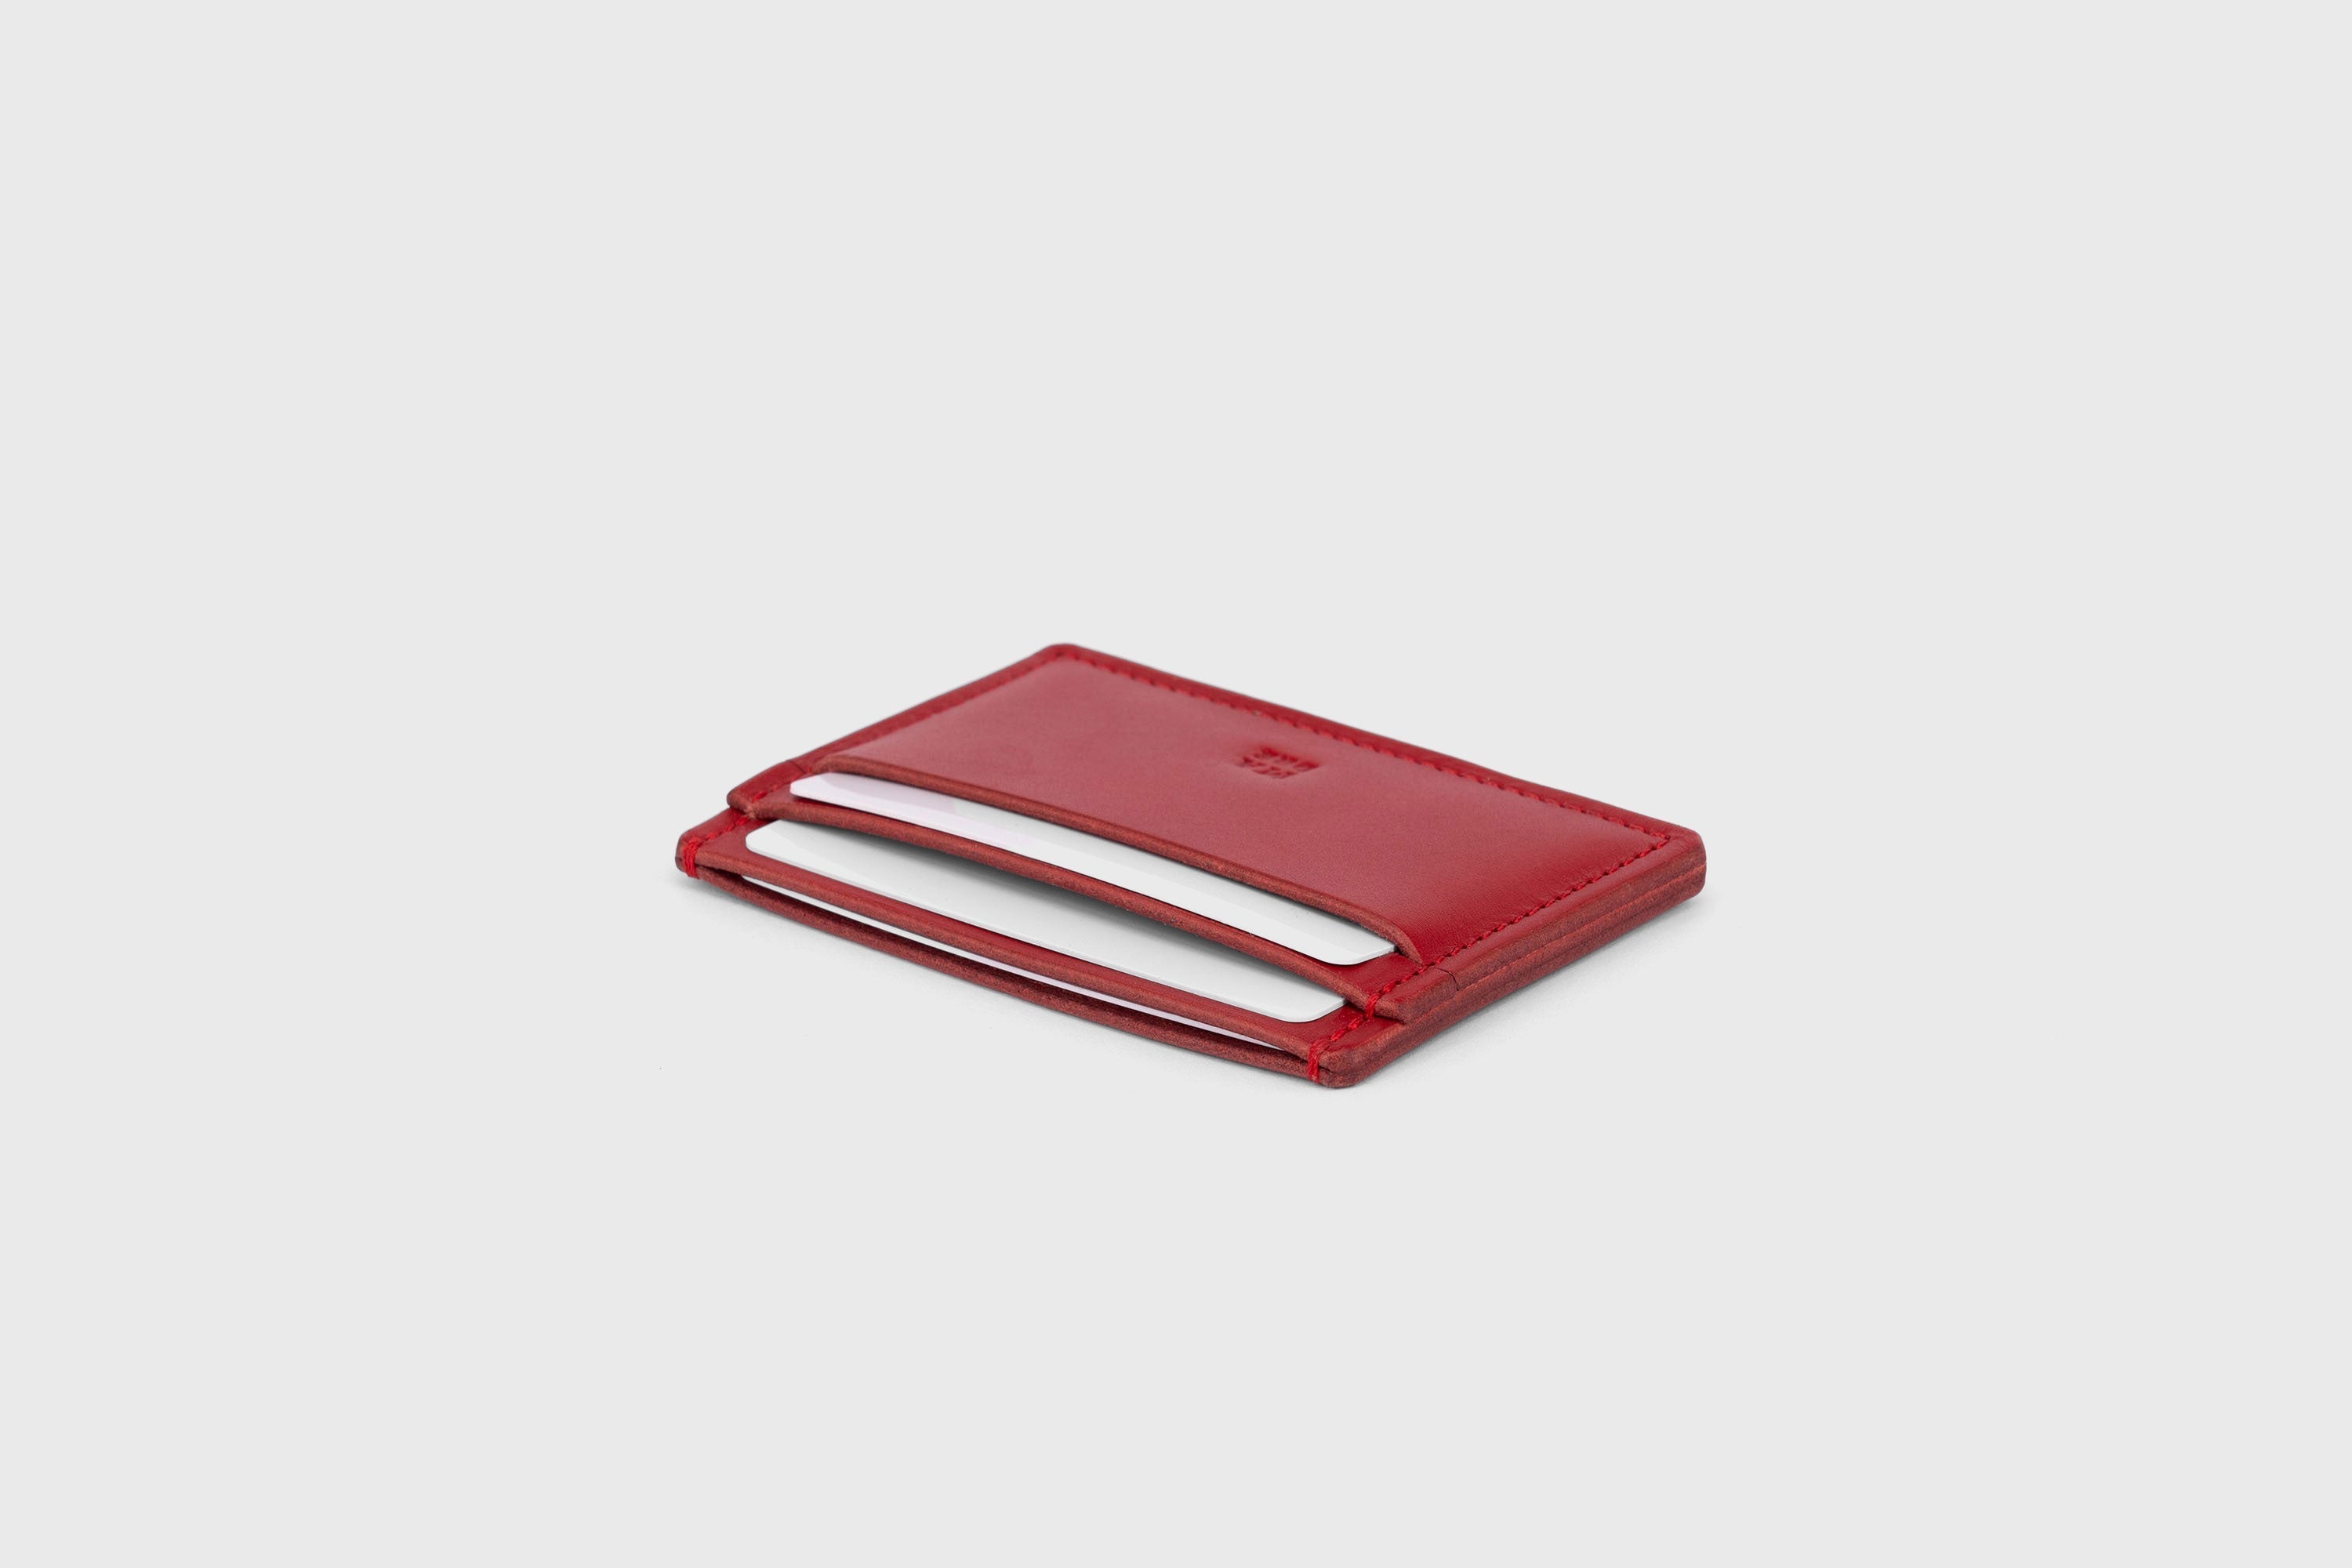 Credit Card Wallet in Red Leather Vachetta Vegetable Tanned Leather Handmade and Premium Design by Atelier Madre Manuel Dreesmann Barcelona Spain